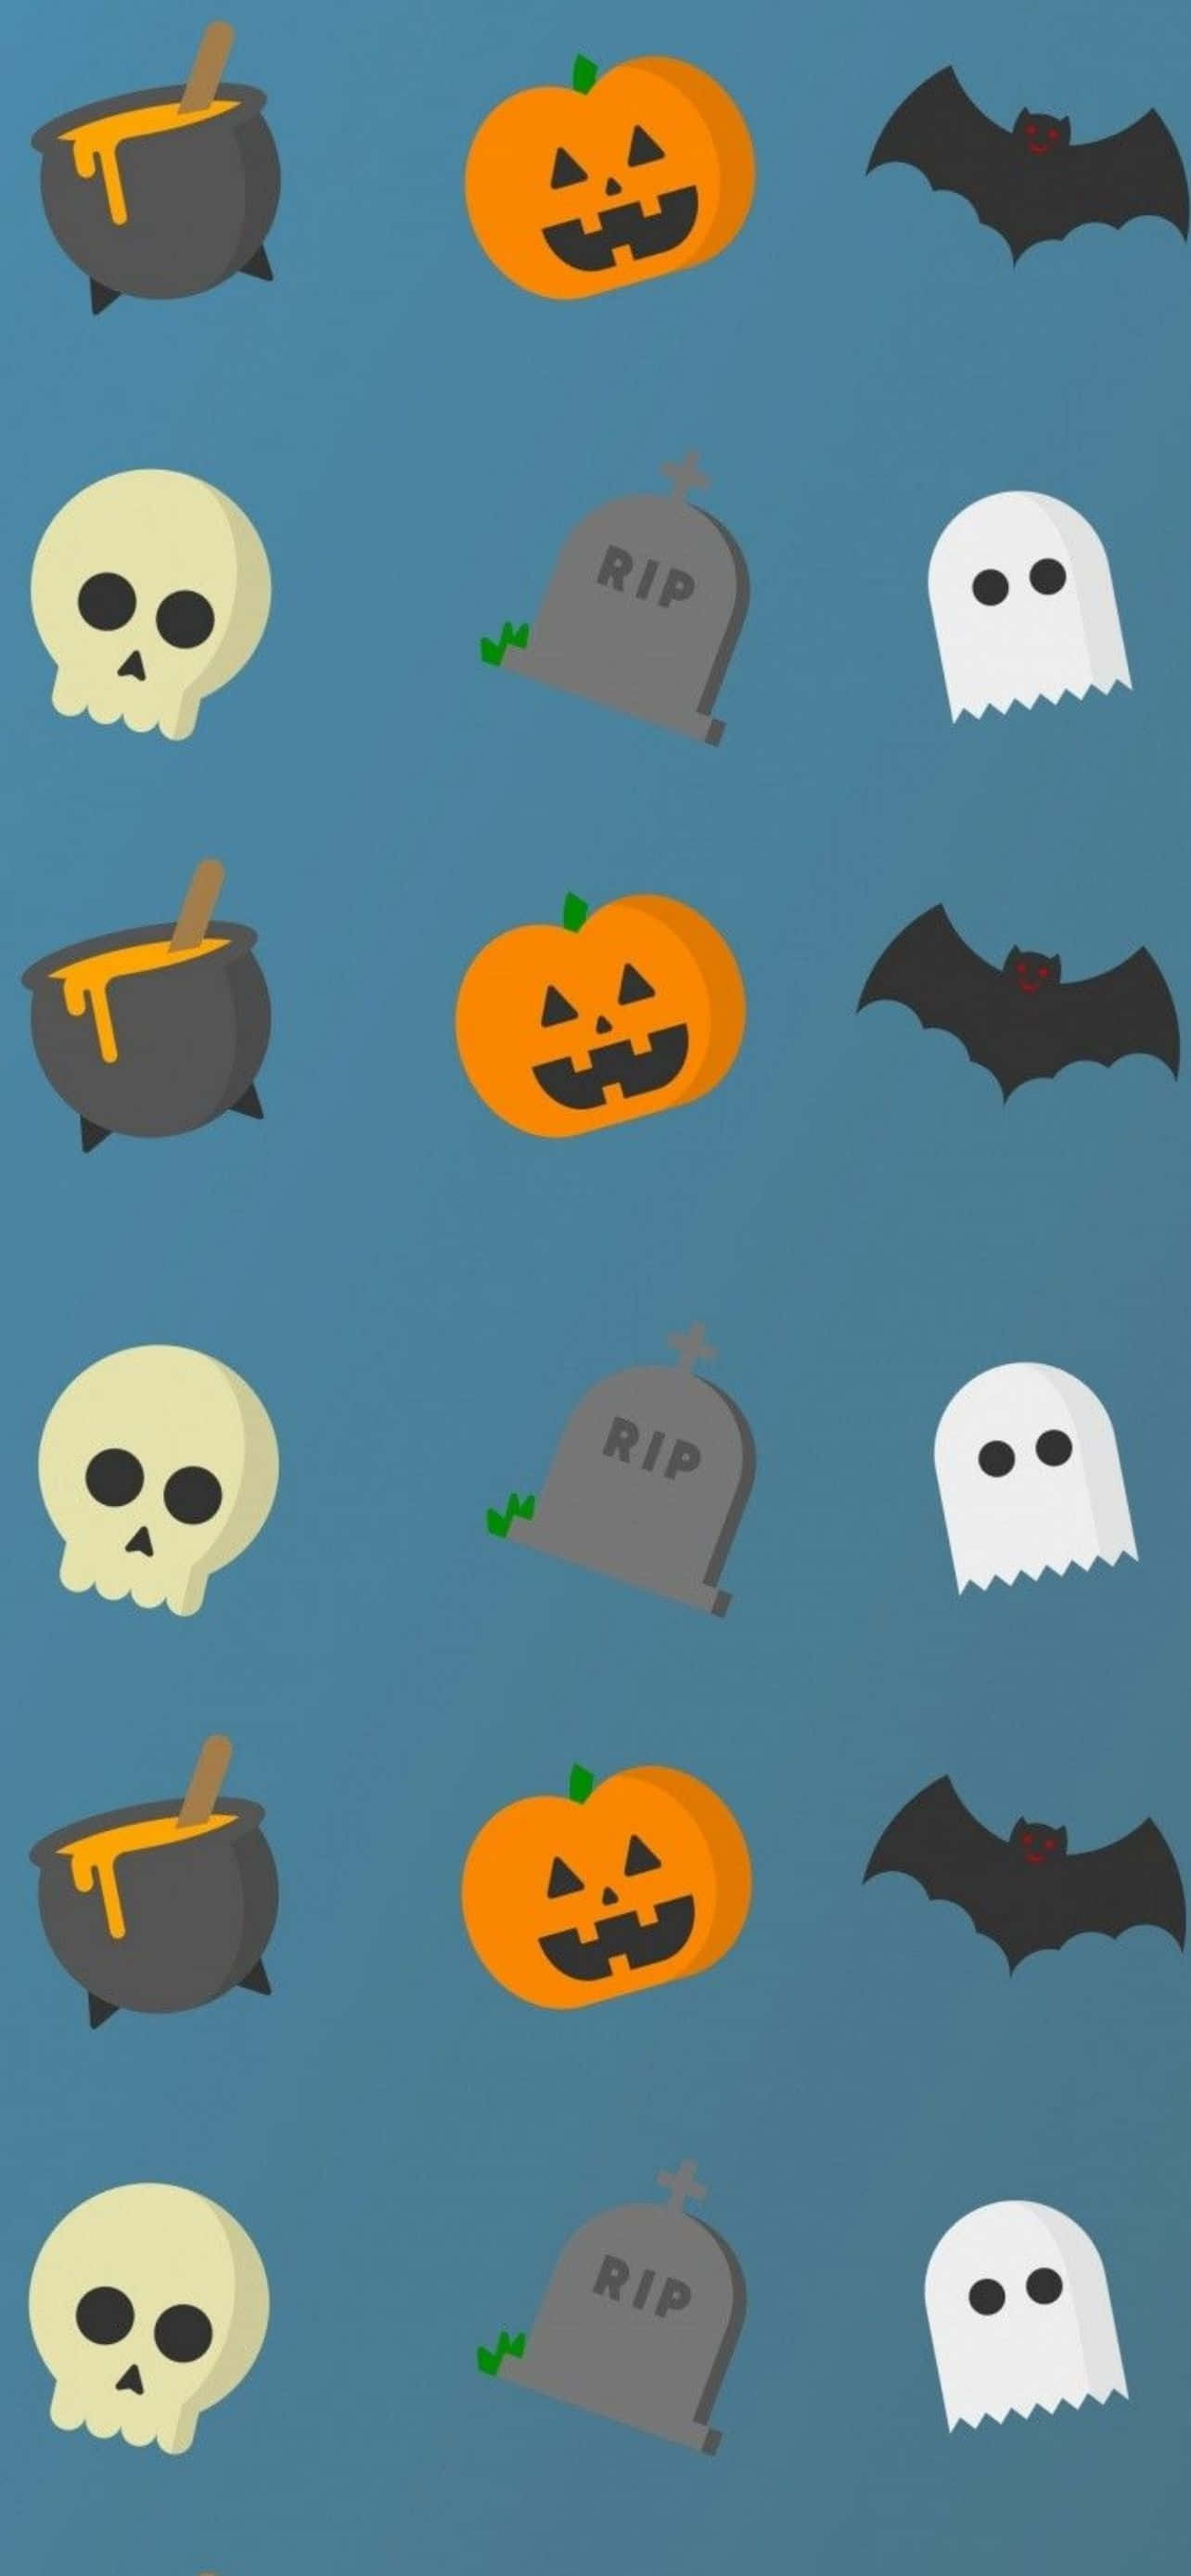 Get your Halloween spirit on with this festive iPhone wallpaper.